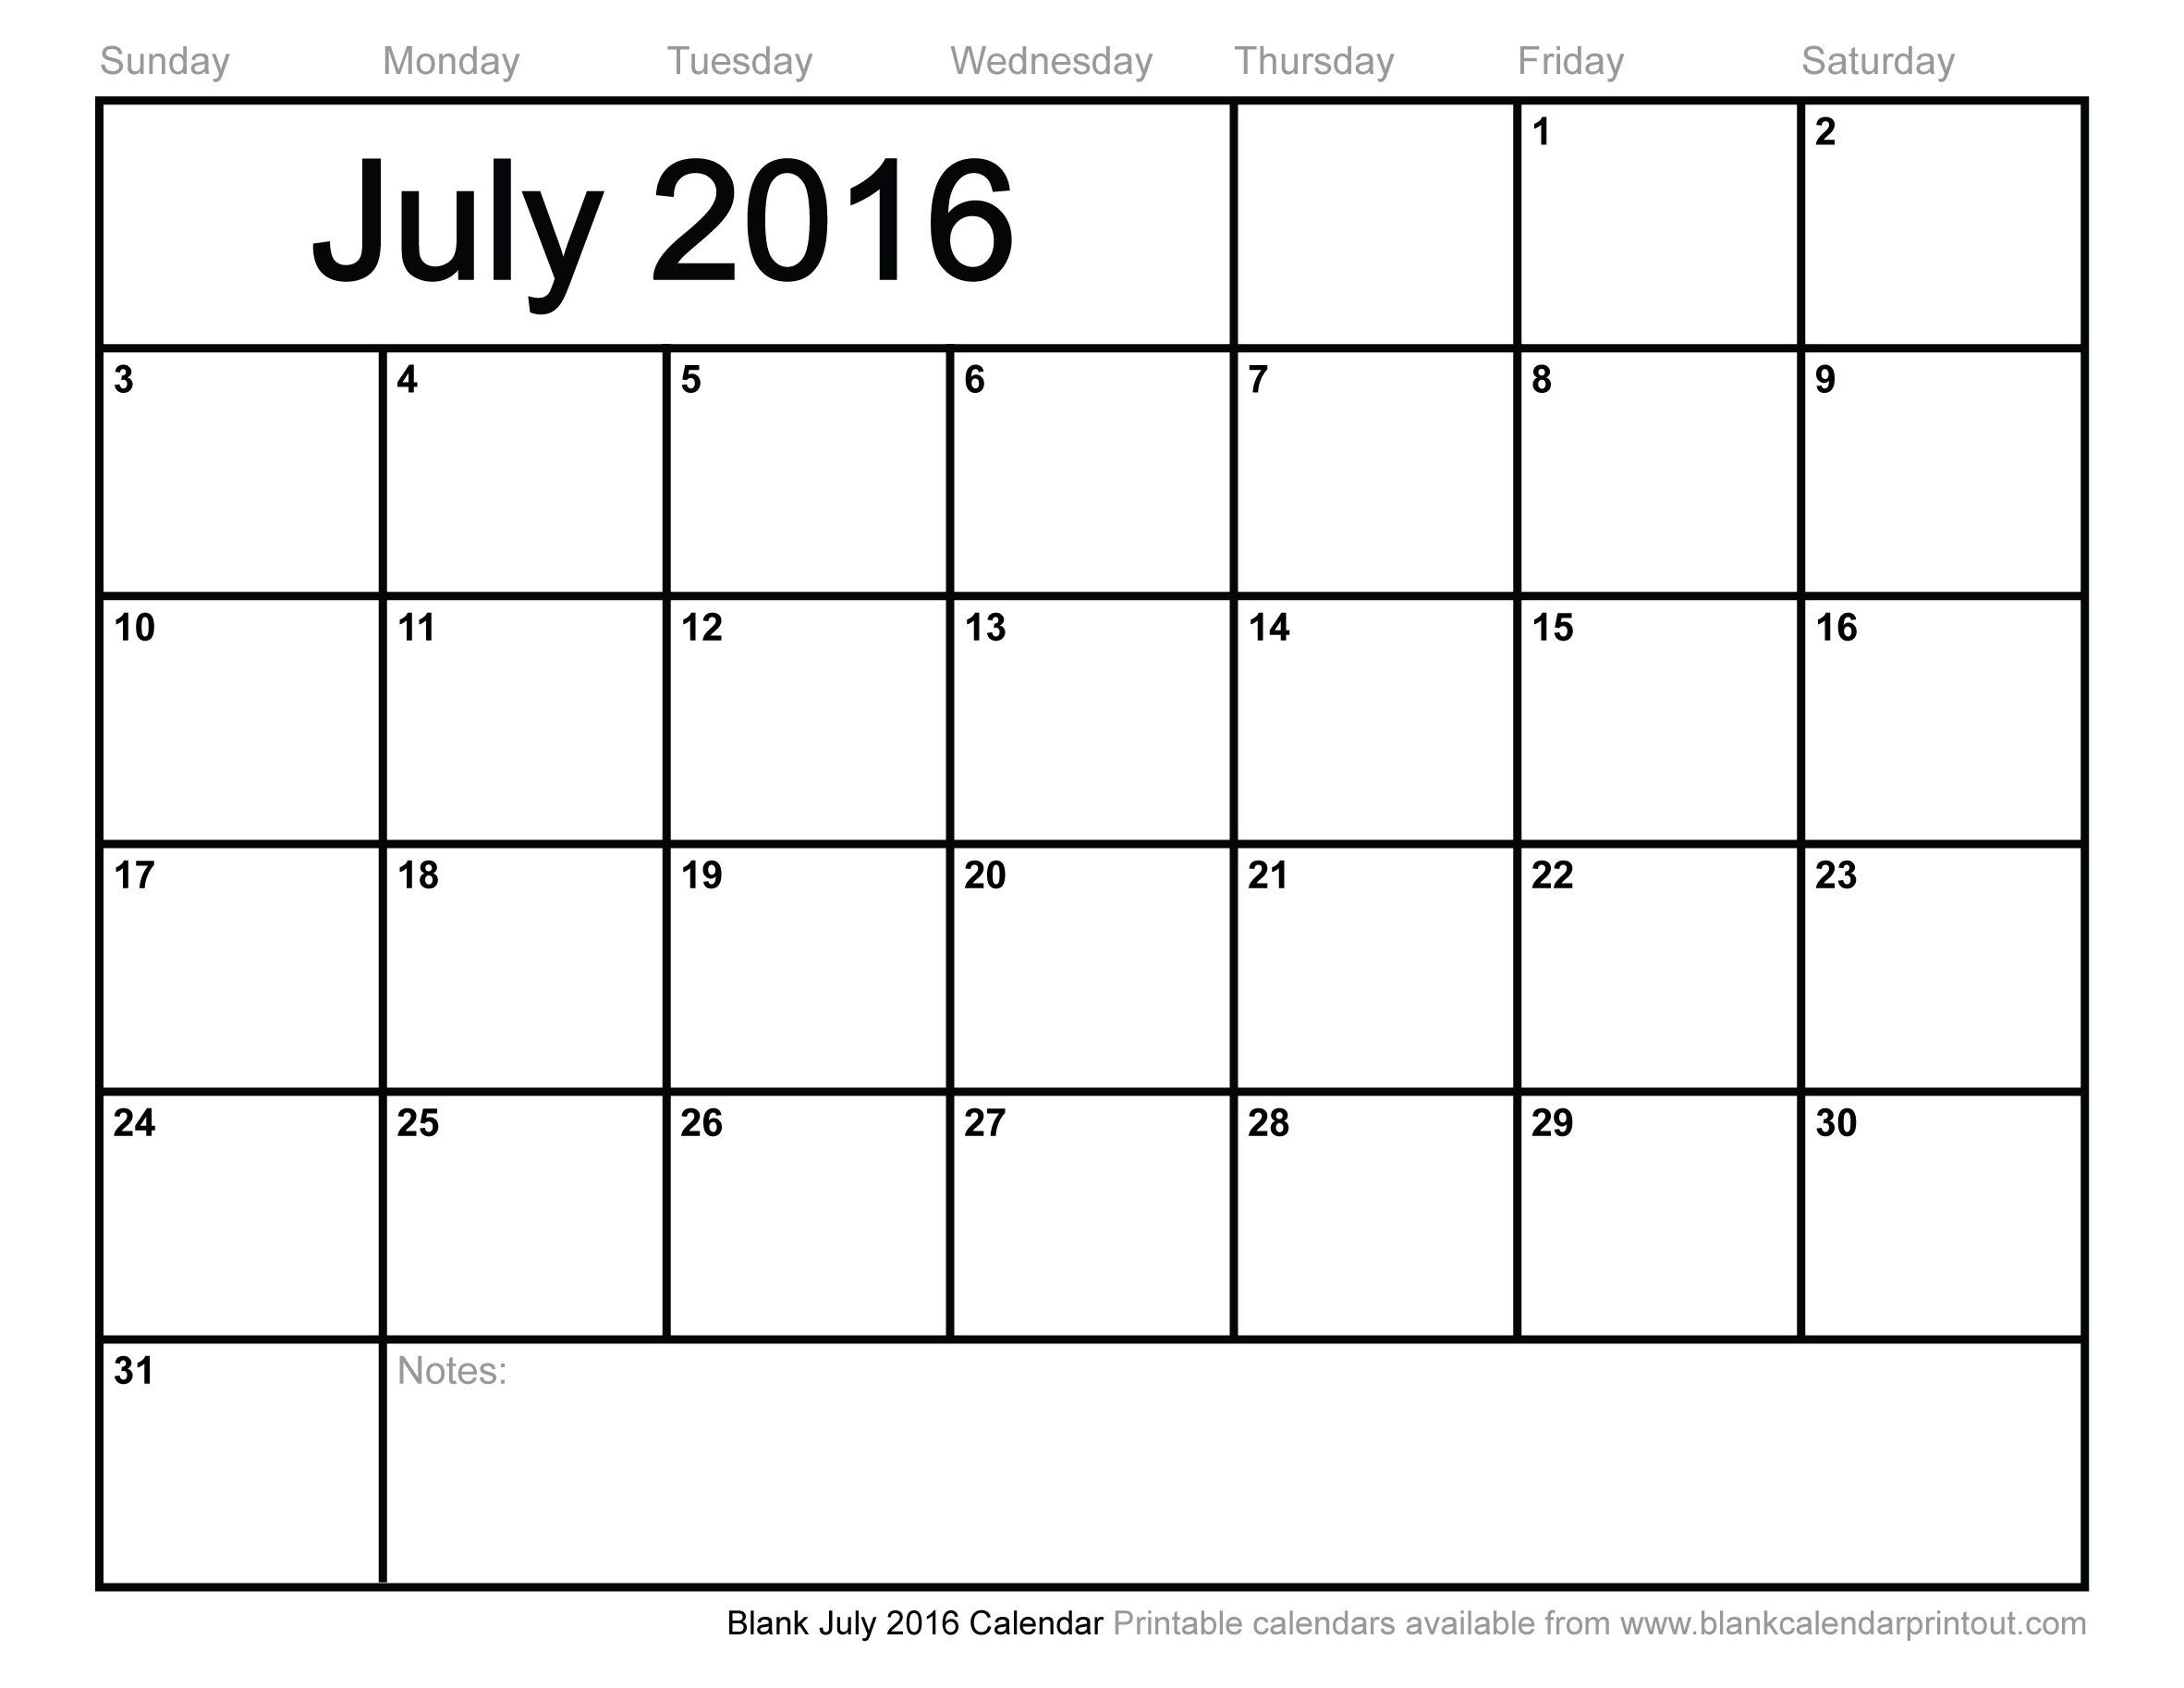 My Favorite Website For A Basic Monthly Calendar Printout